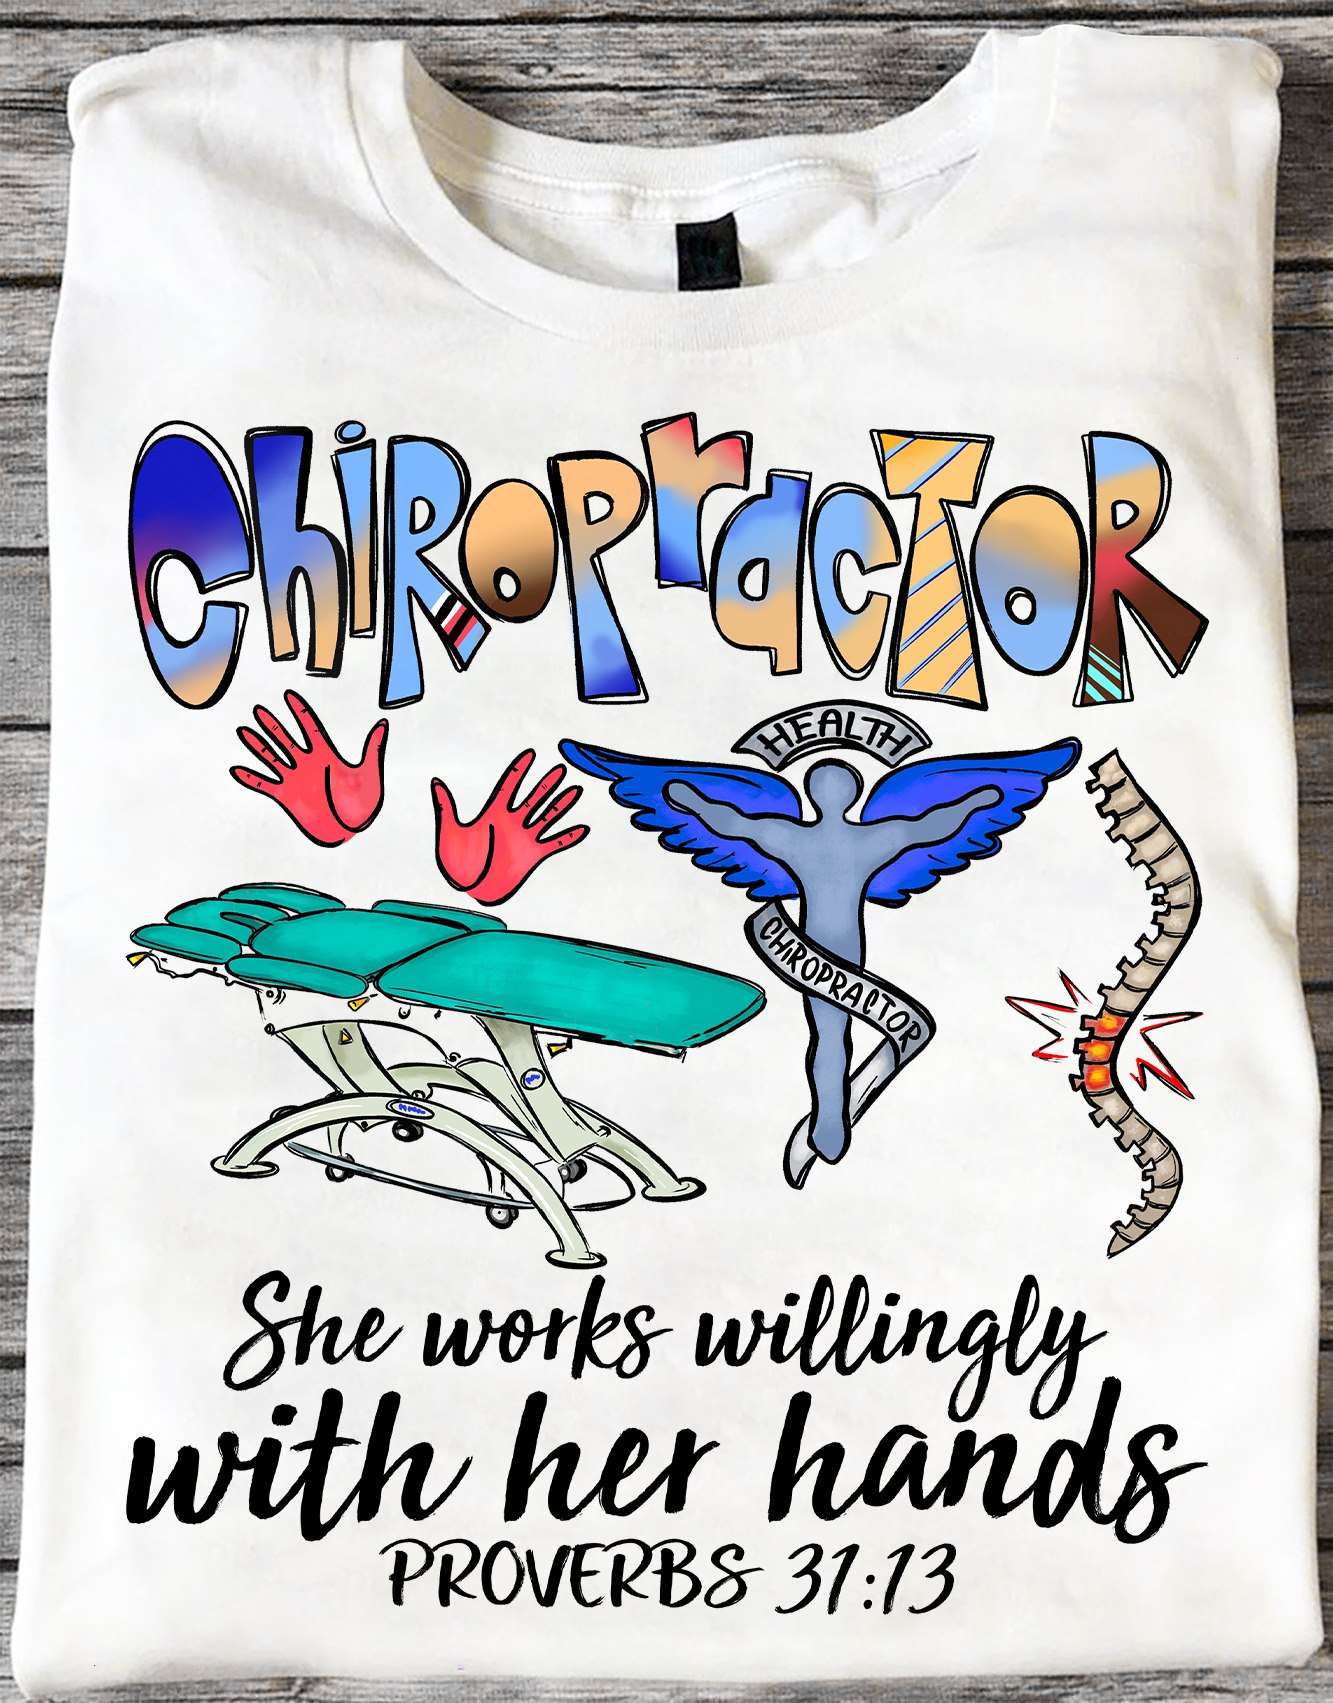 Chiropractor she works willingly with her hands - Chiropractor the job, health chiropractor